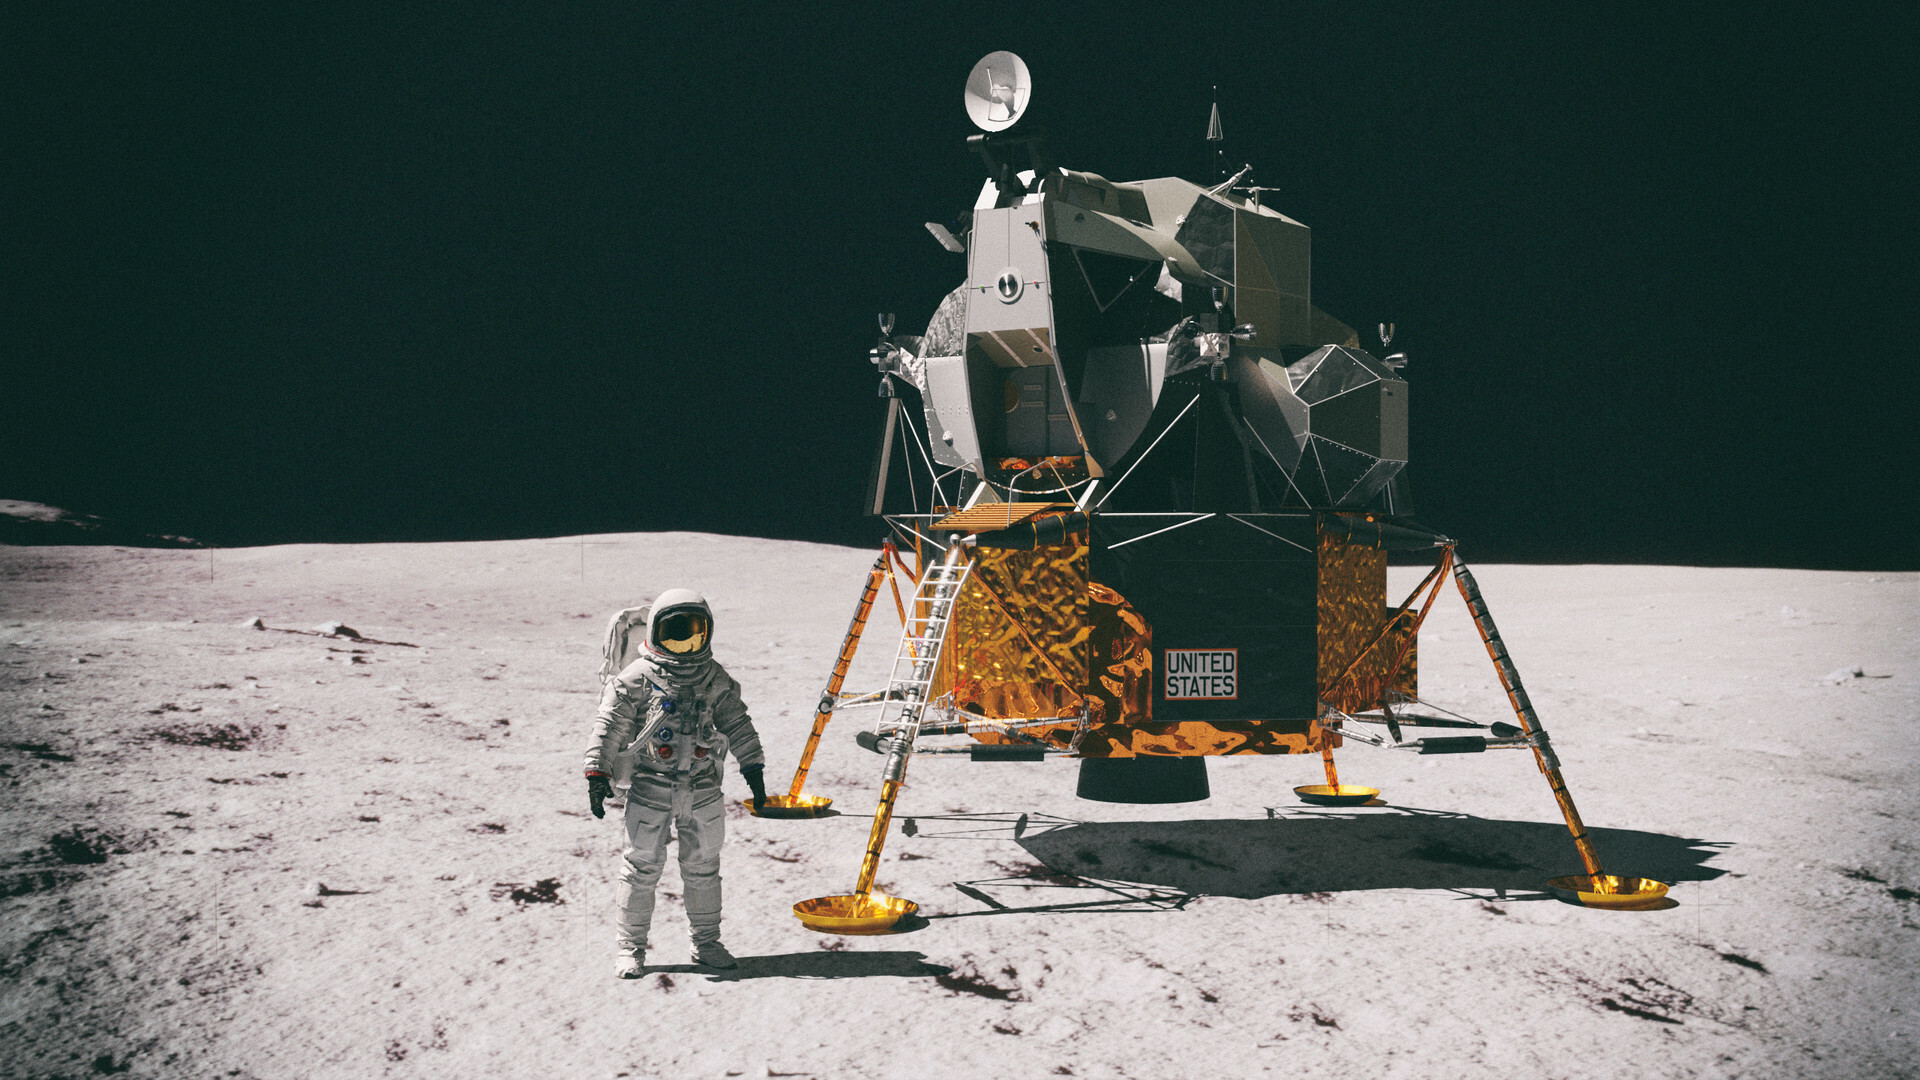 Apollo 11: The Moon landing, Astronaut Neil Armstrong, 1969. 1920x1080 Full HD Background.